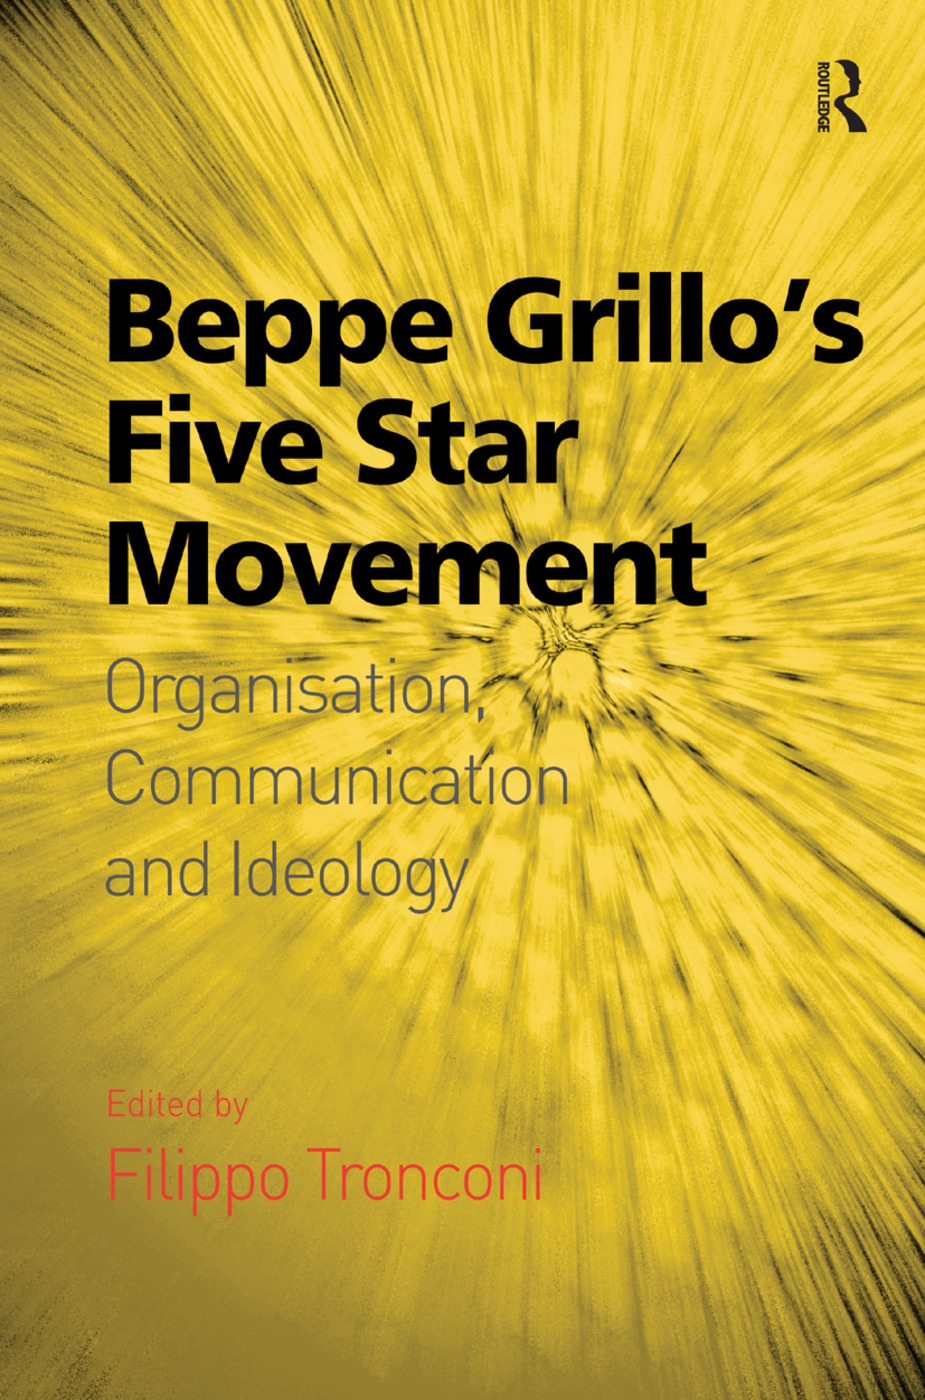 Beppe Grillo’s Five Star Movement: Organisation, Communication and Ideology